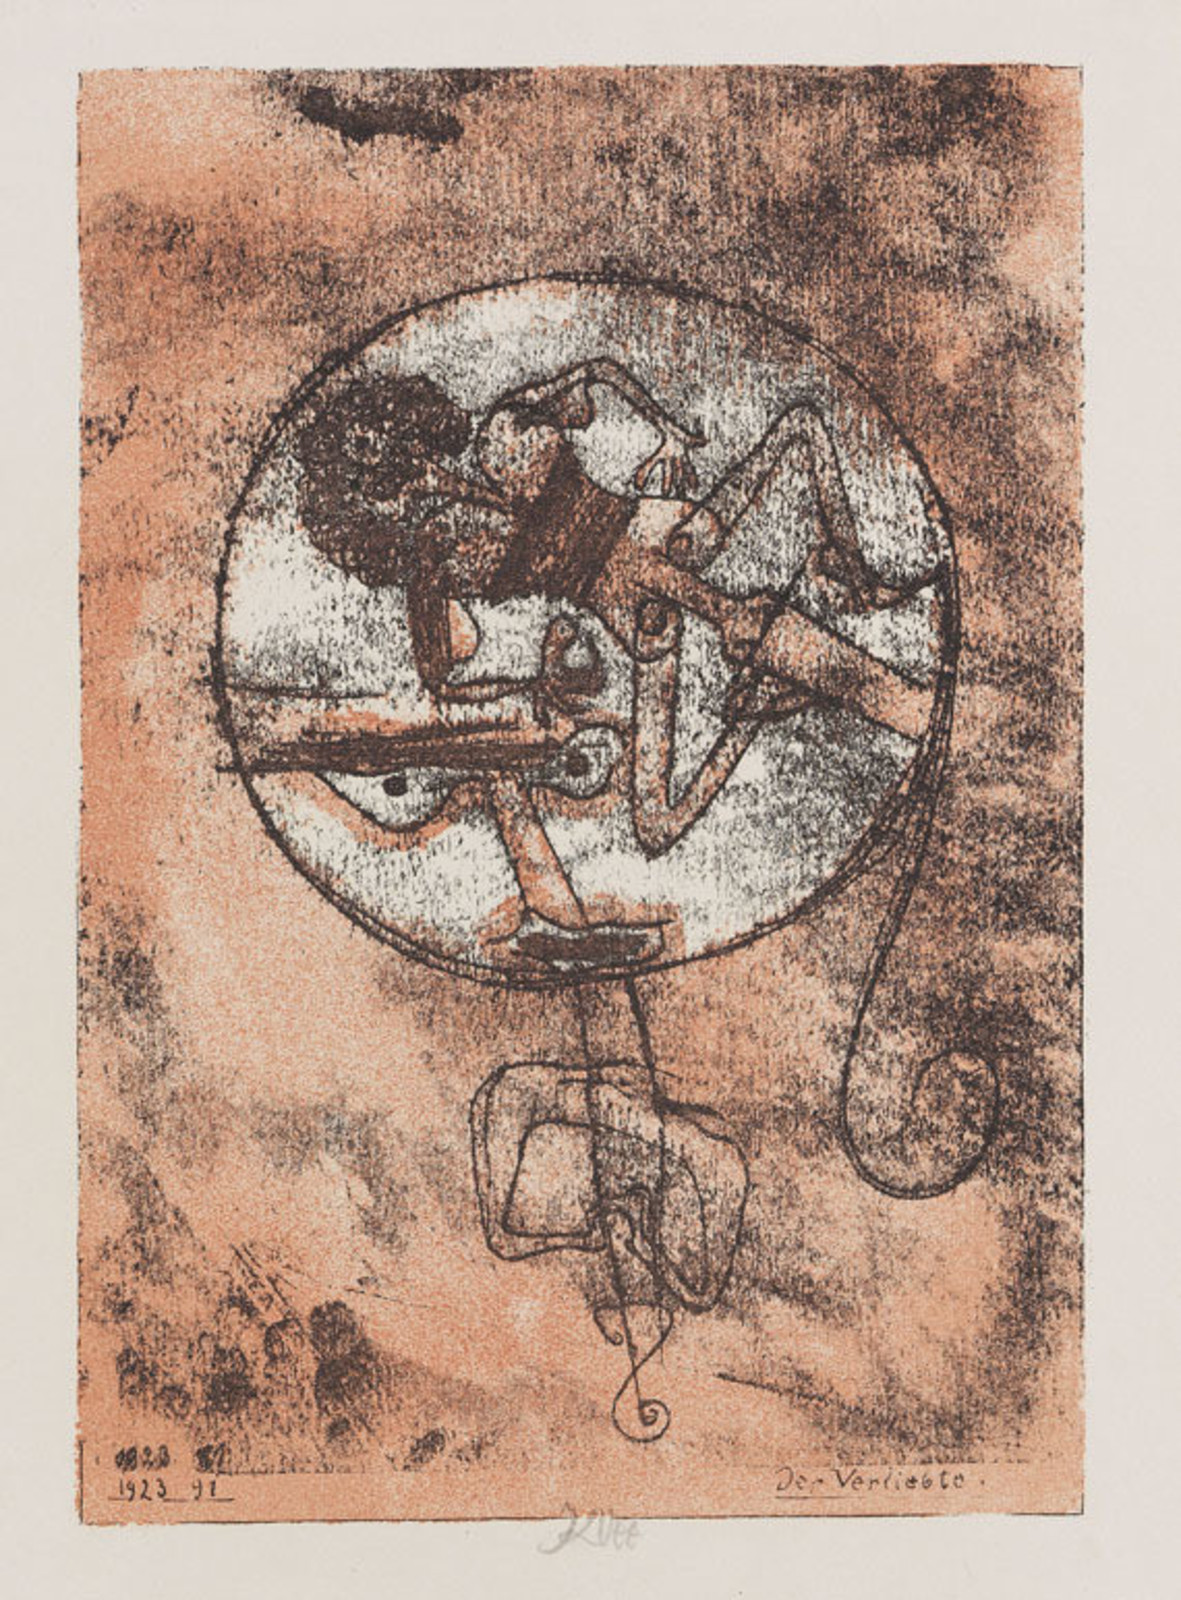 Paul Klee. The One in Love (Der Verliebte). 1923. Lithograph. 34.4 x 26.9 cm. The Museum of Modern Art (New York City, United States)